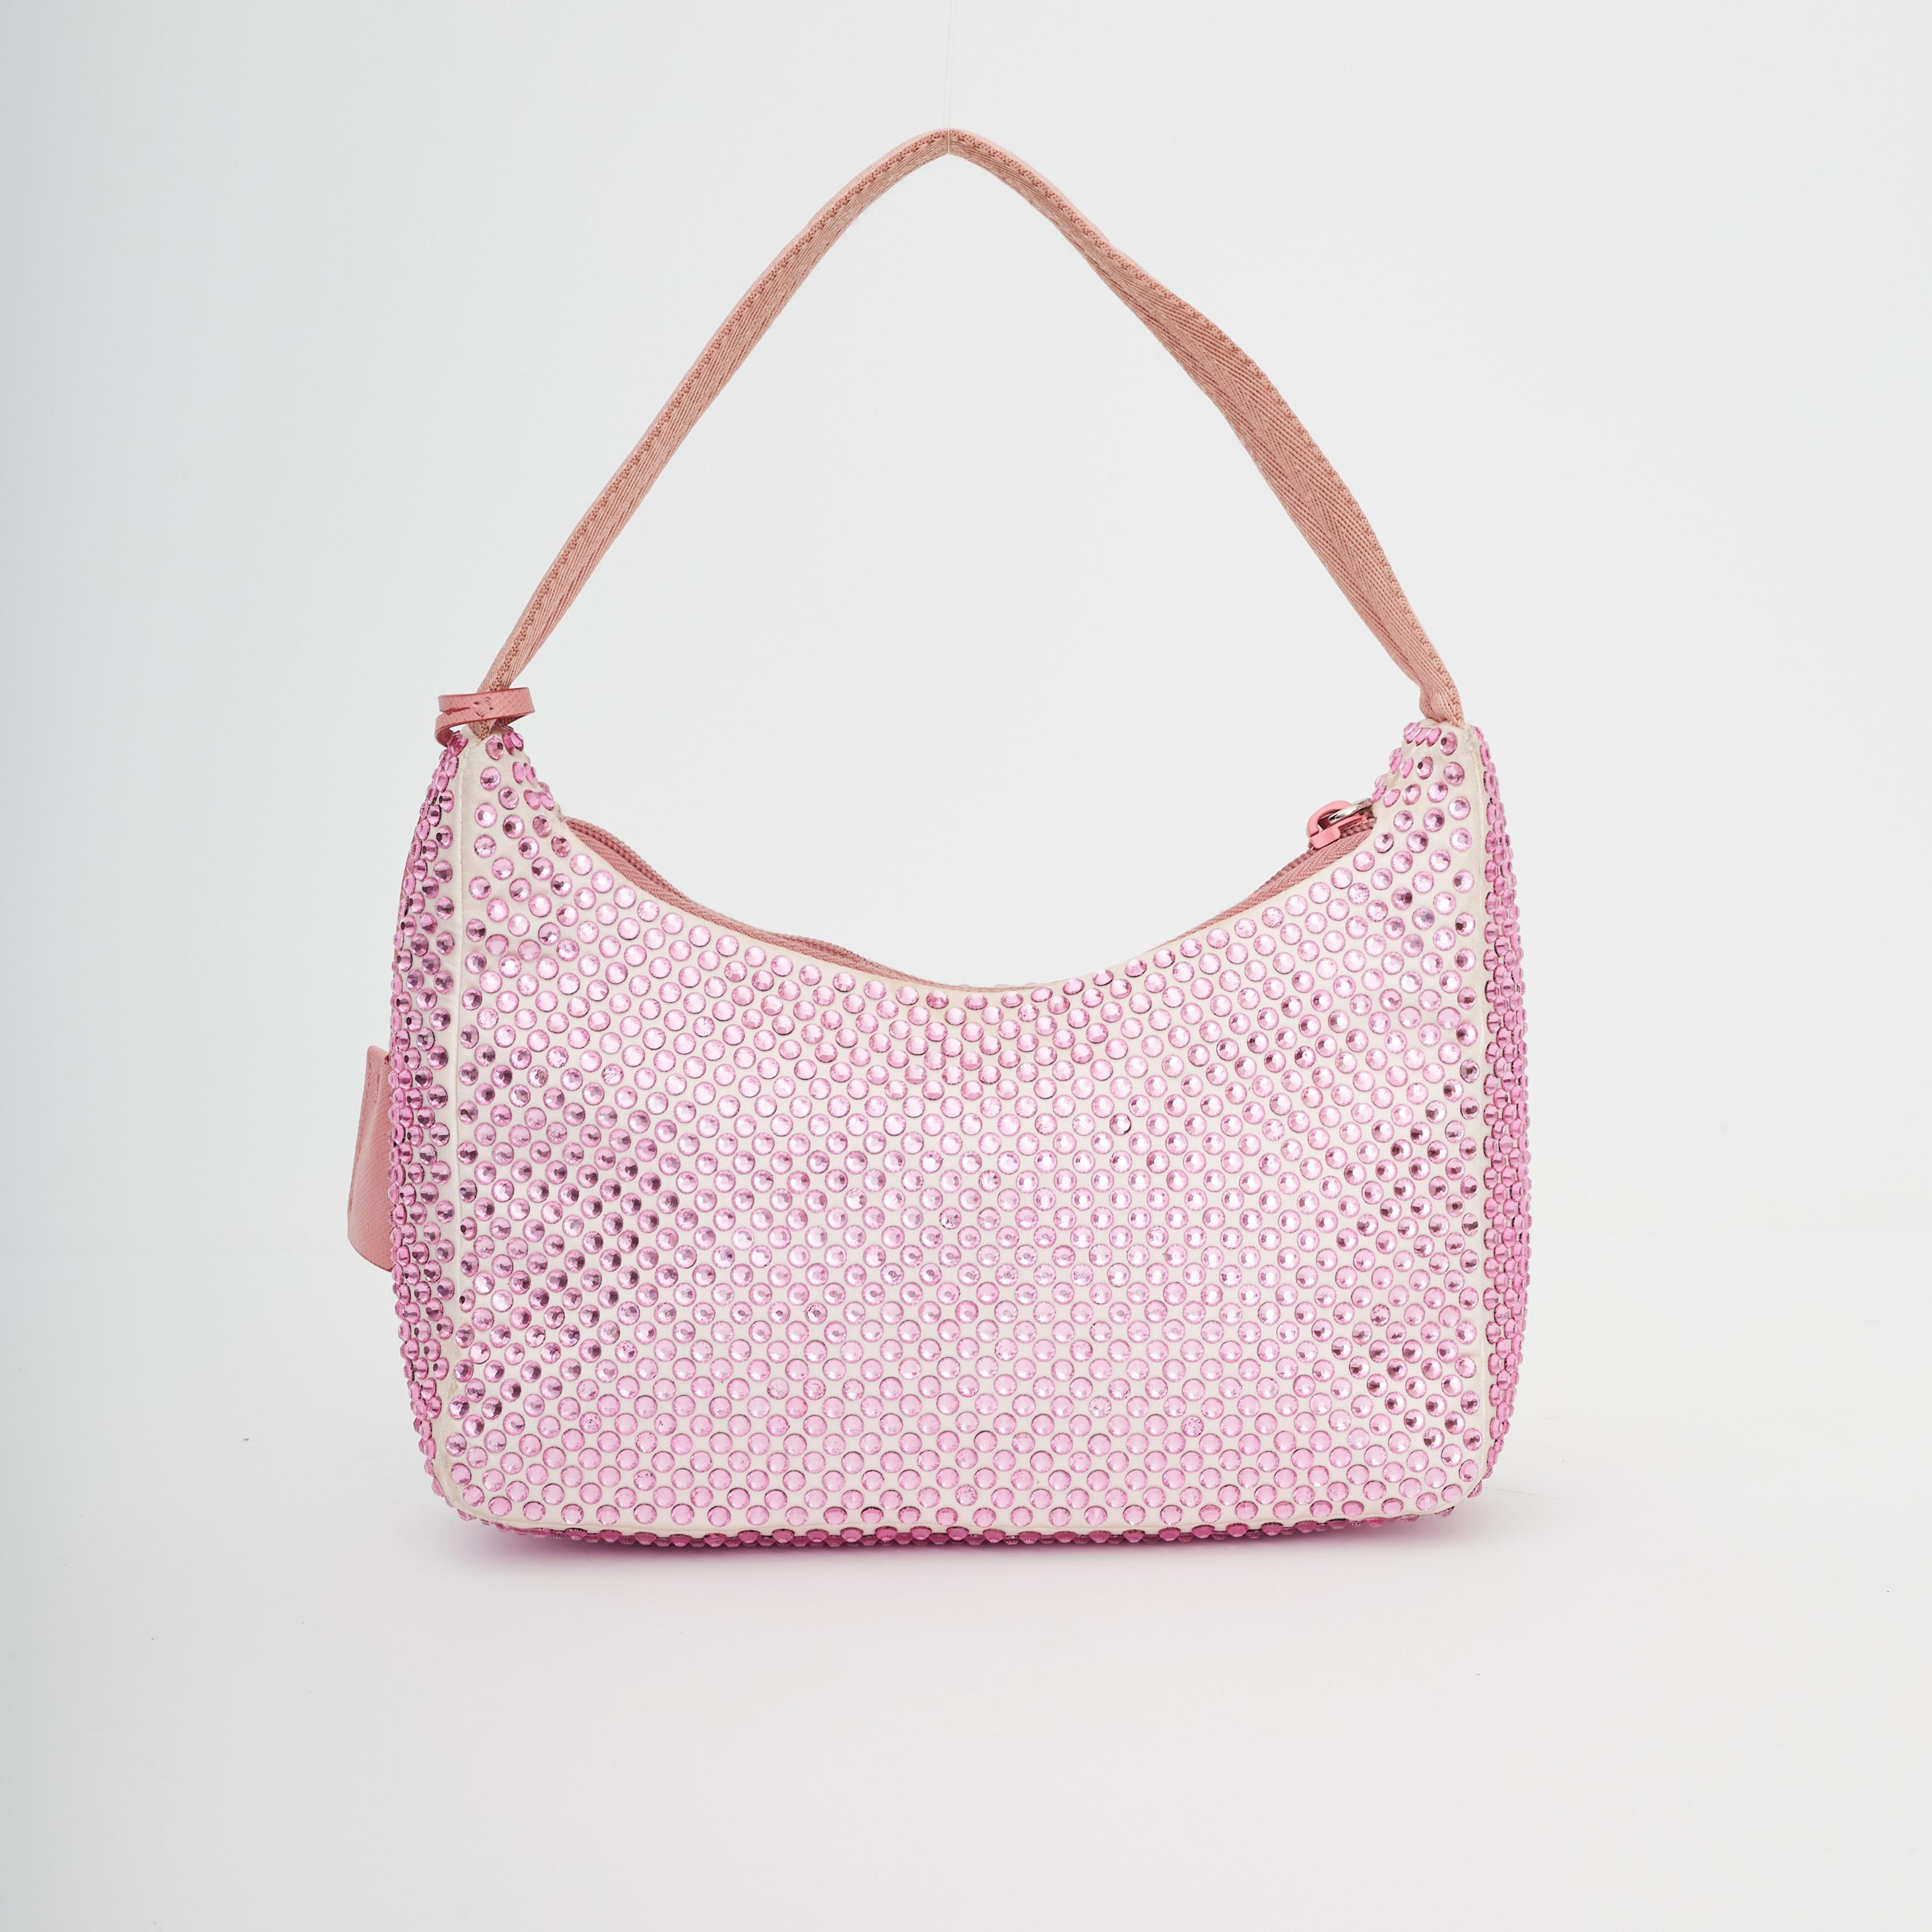 This Prada handbag is made of crystal embellished satin. The bag features a nylon shoulder strap and the top zipper opens to a matching fabric interior. Miami exclusive bought from the design district. Rosttea. Work with Miami artist.

COLOR: